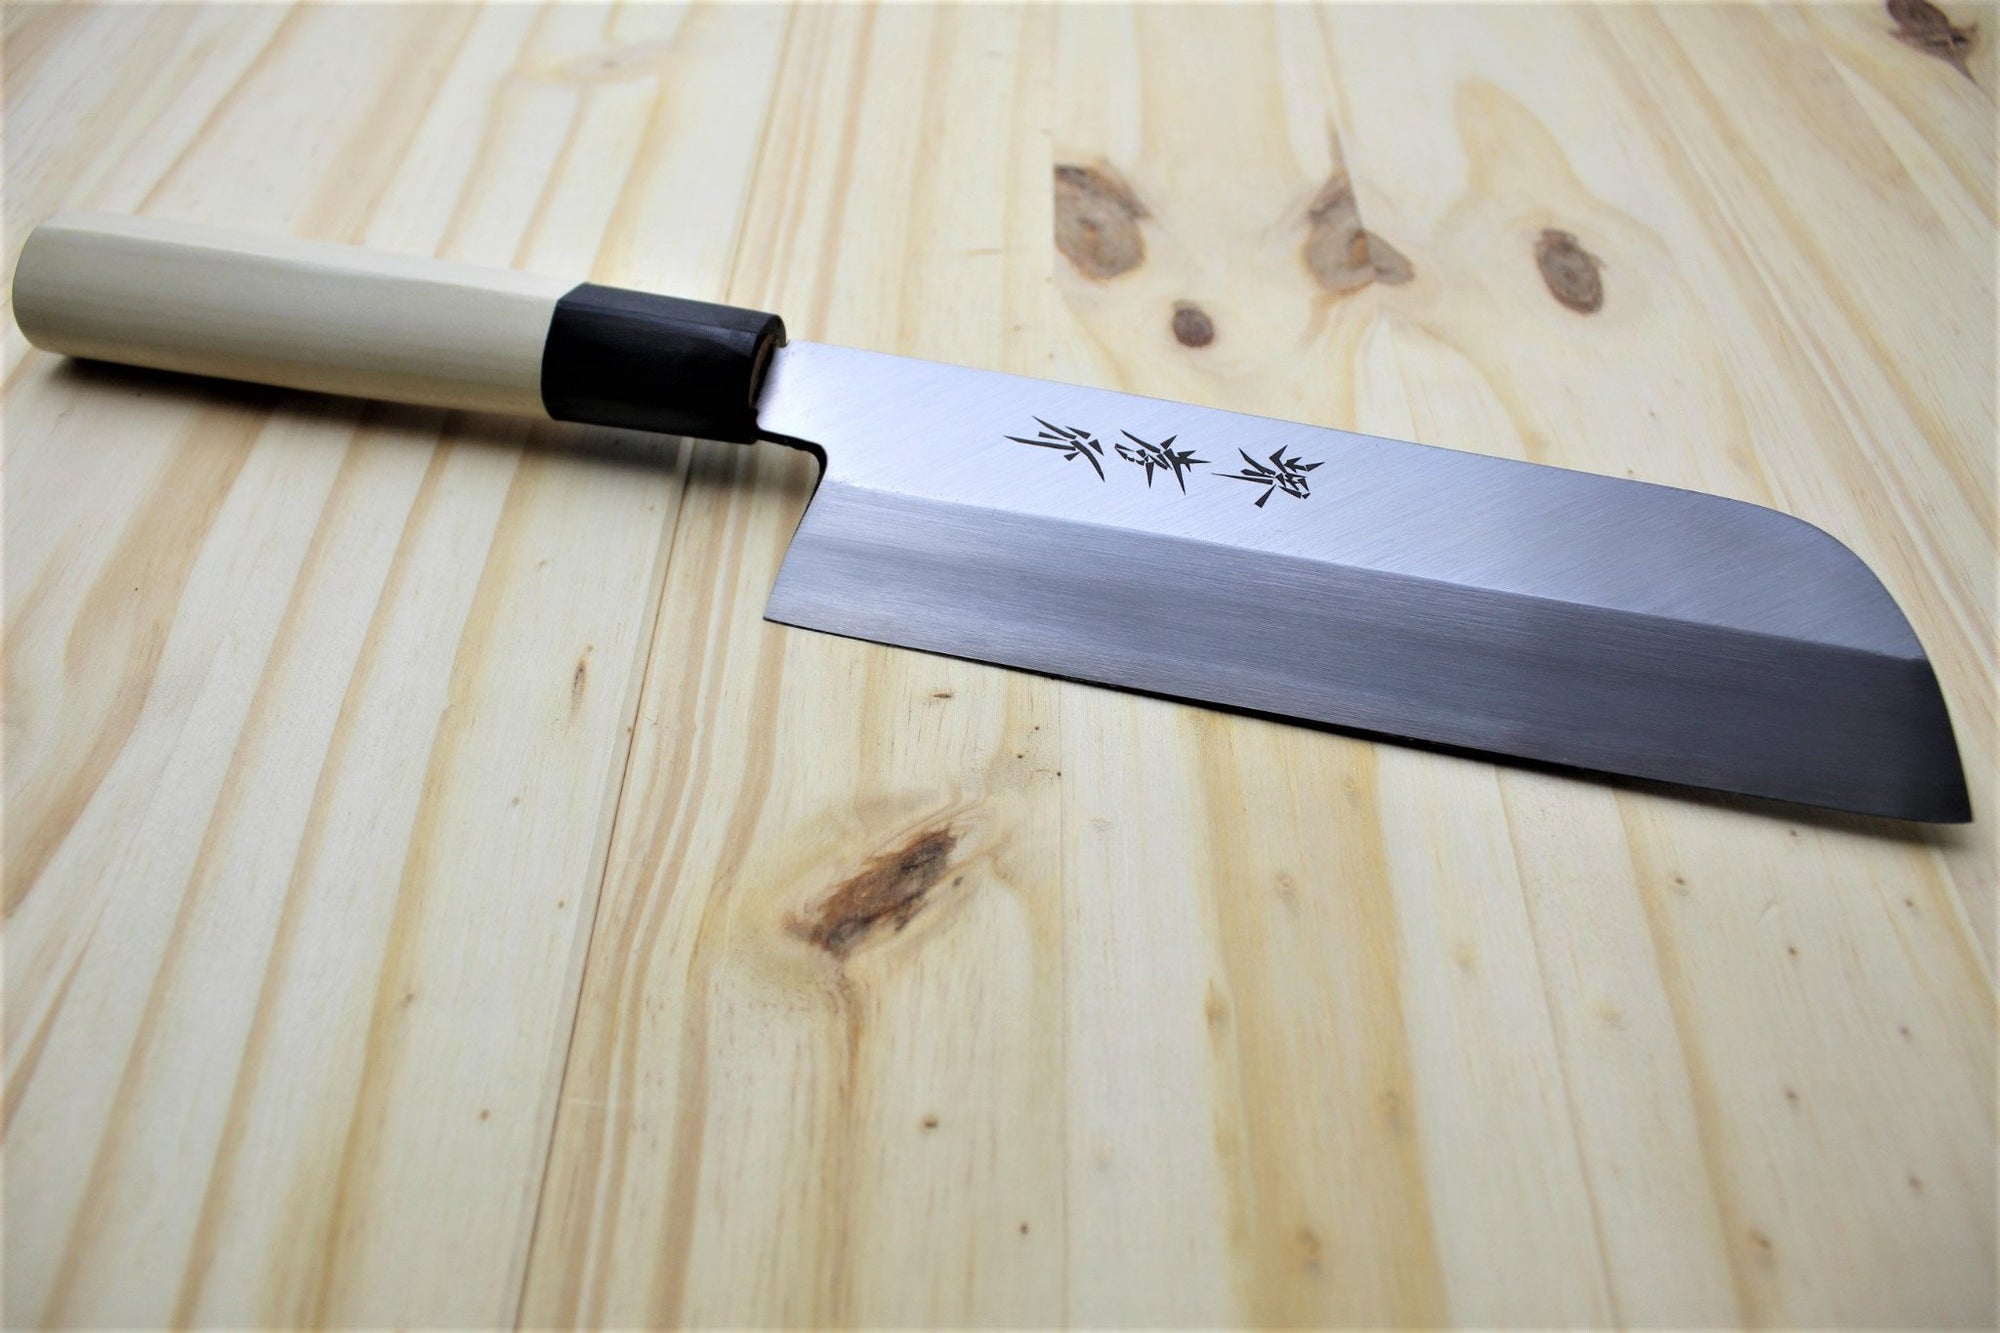 What Are Usuba Knives Used For?